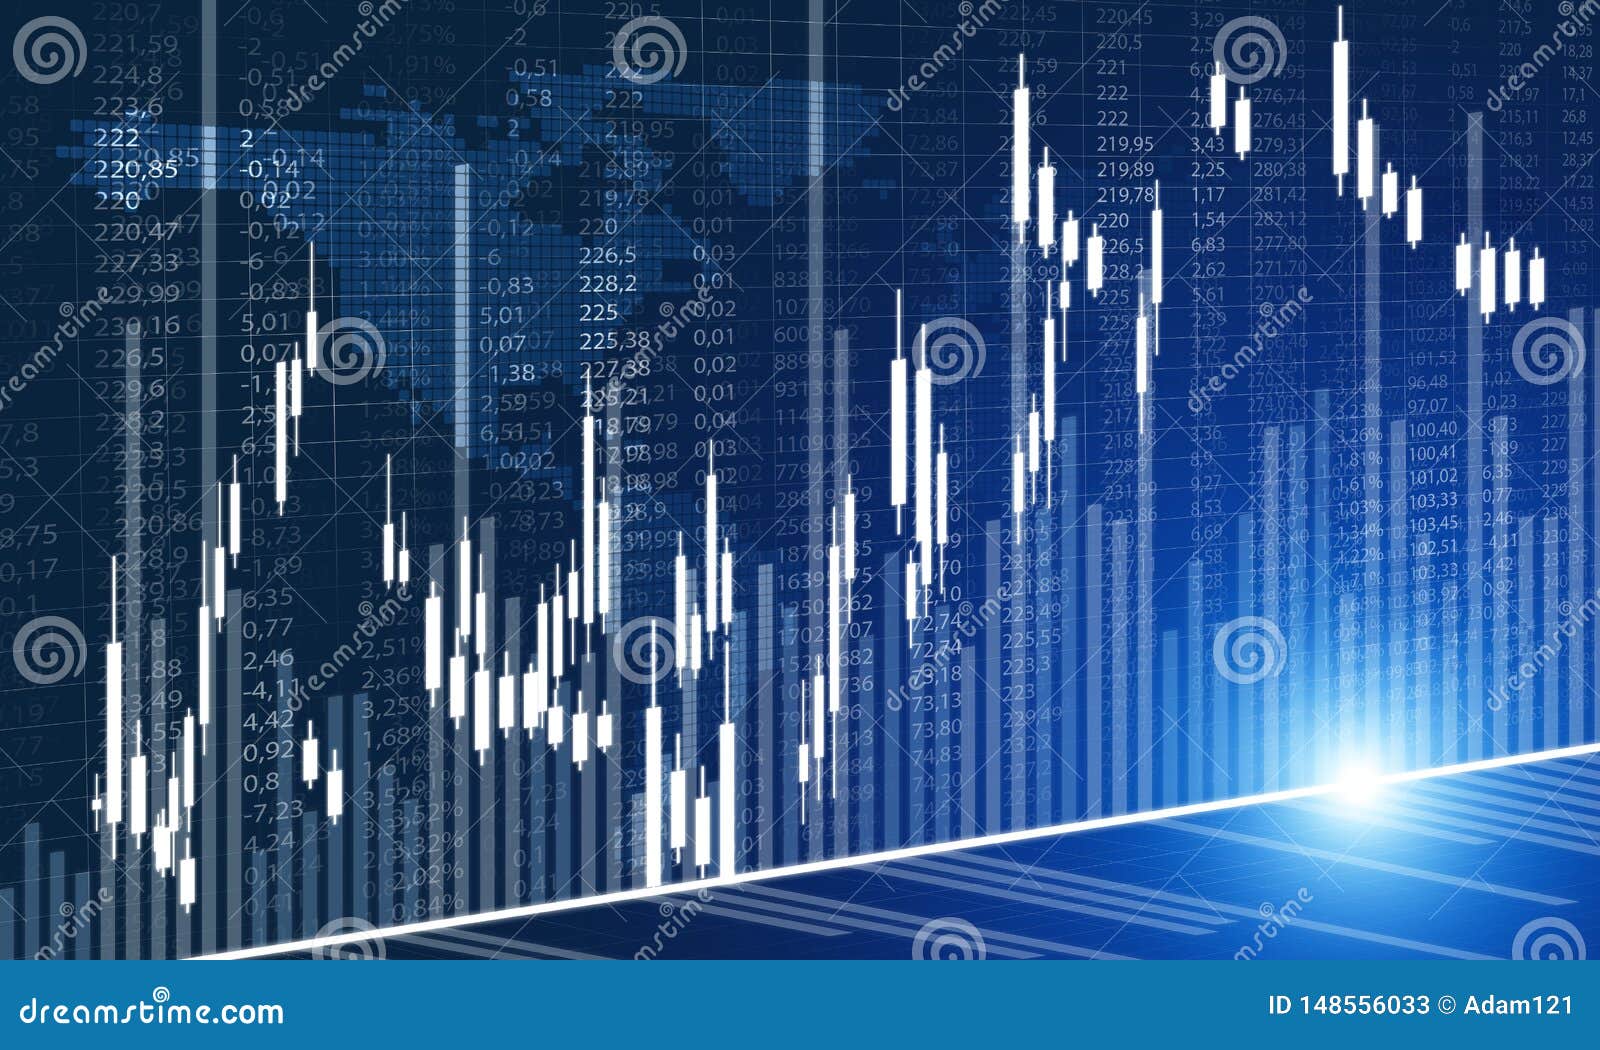 Financial And Technology Concept With Graphs And Charts On Blue Background Stock Image Image